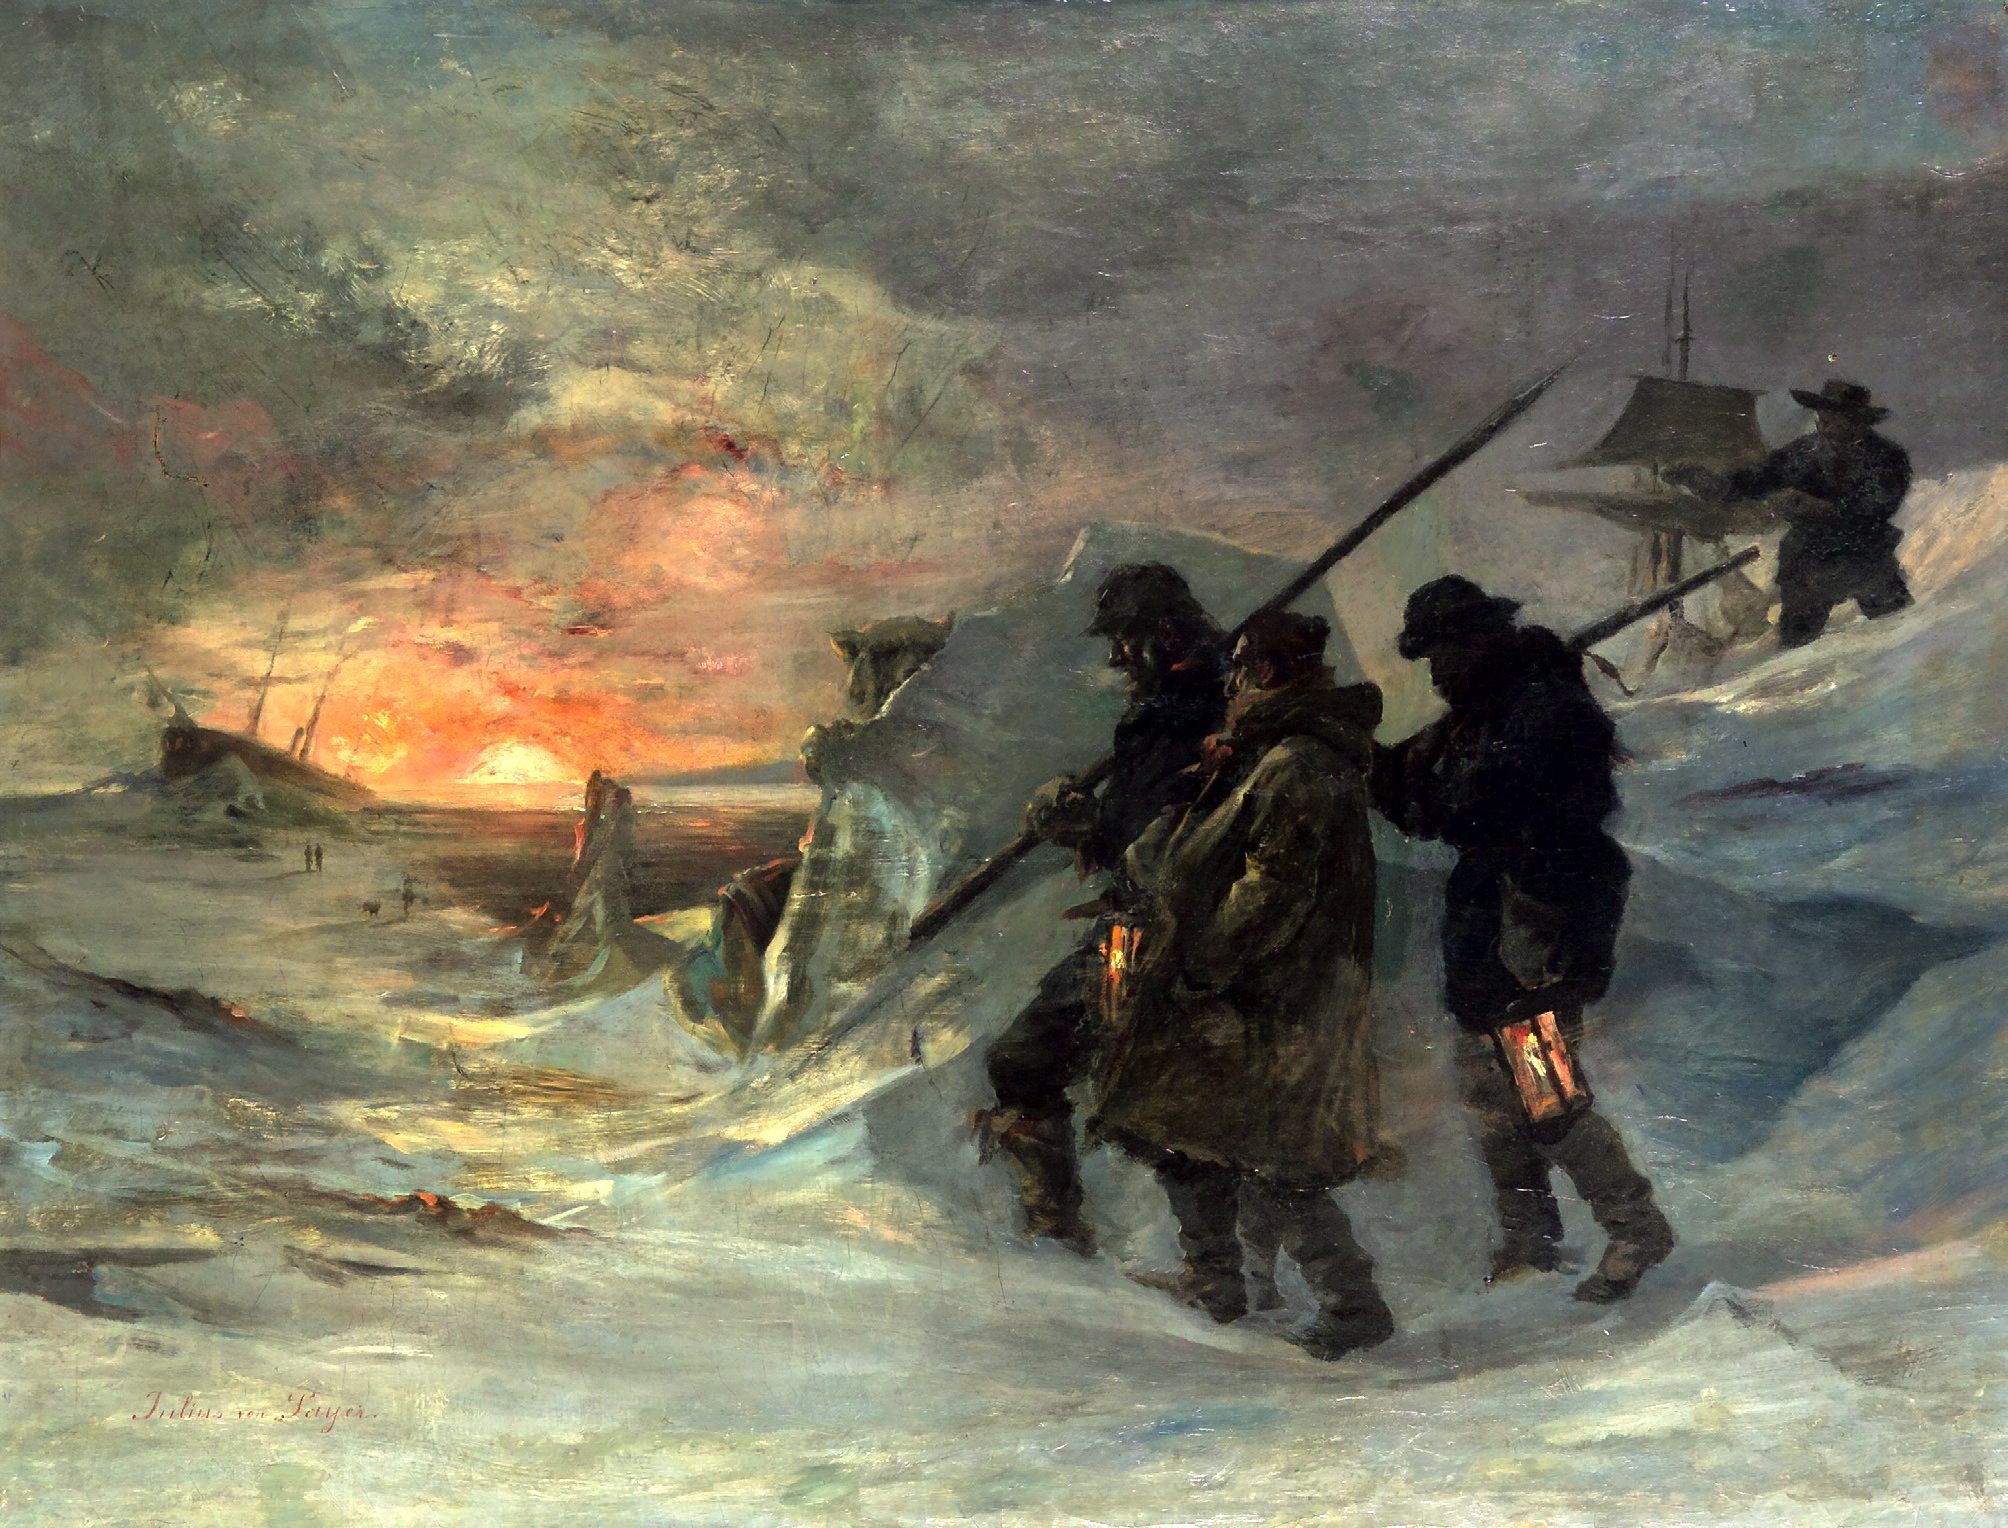 Julius von Payer’s "Going Out to Dinner," inspired by the Austrian Expedition to the North Pole (1872-74) on which Payer was an officer. The barely visible, lurking carnivore reminded viewers that explorers sometimes became a meal instead of securing one. (Courtesy of Tajan / Romain Monteaux-Sarmiento) 